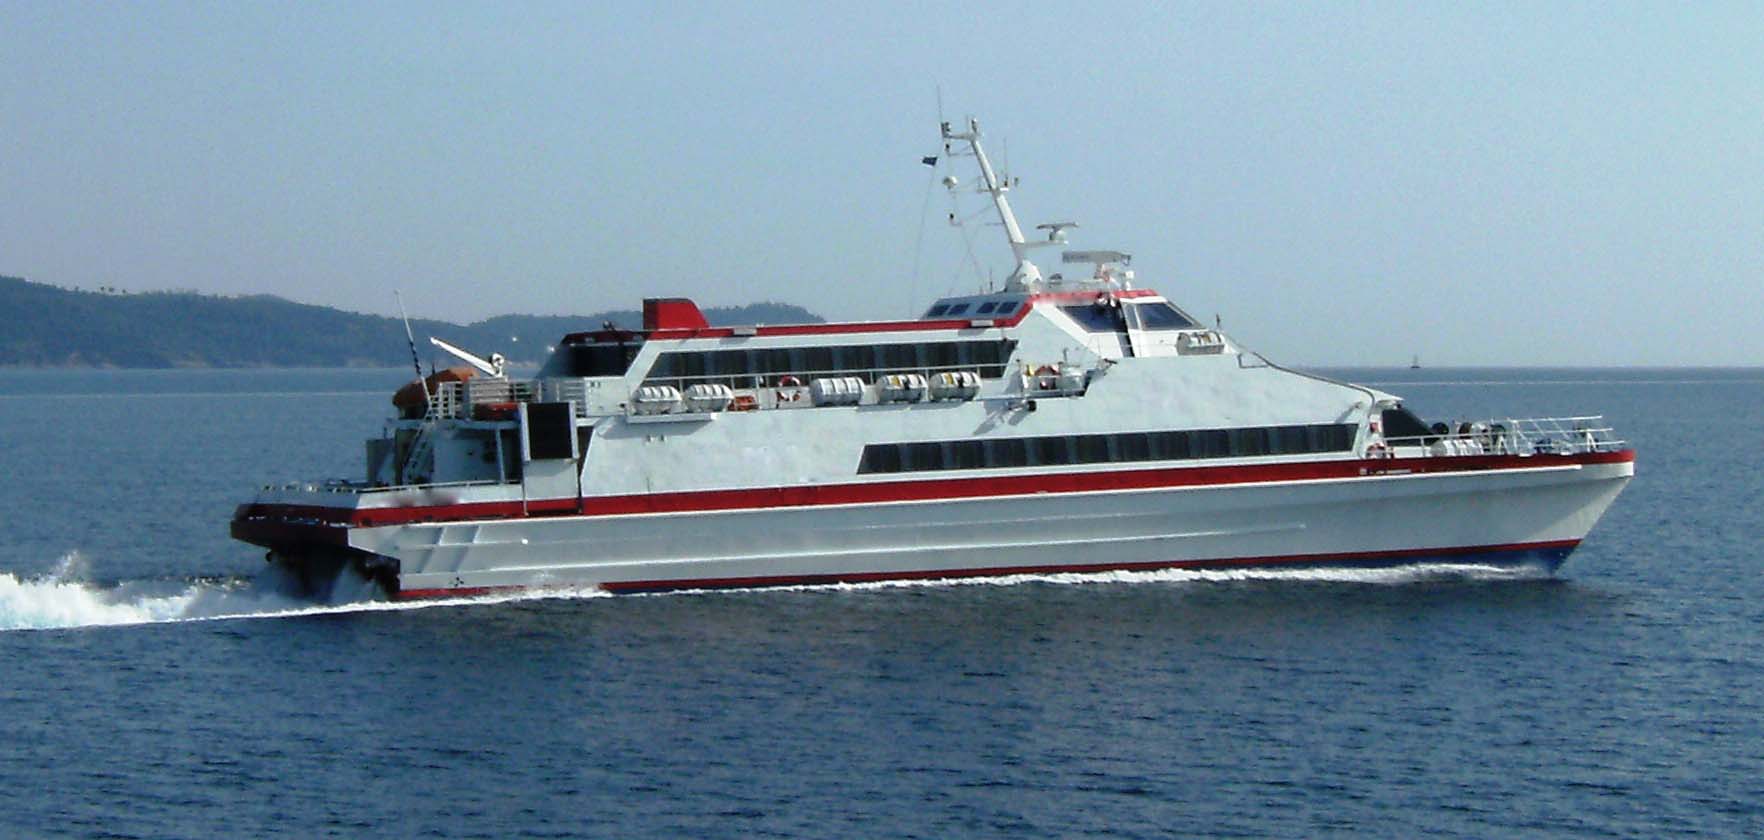 Passenger/Ferry - withdrawn - Welcome to Workboatsales.com